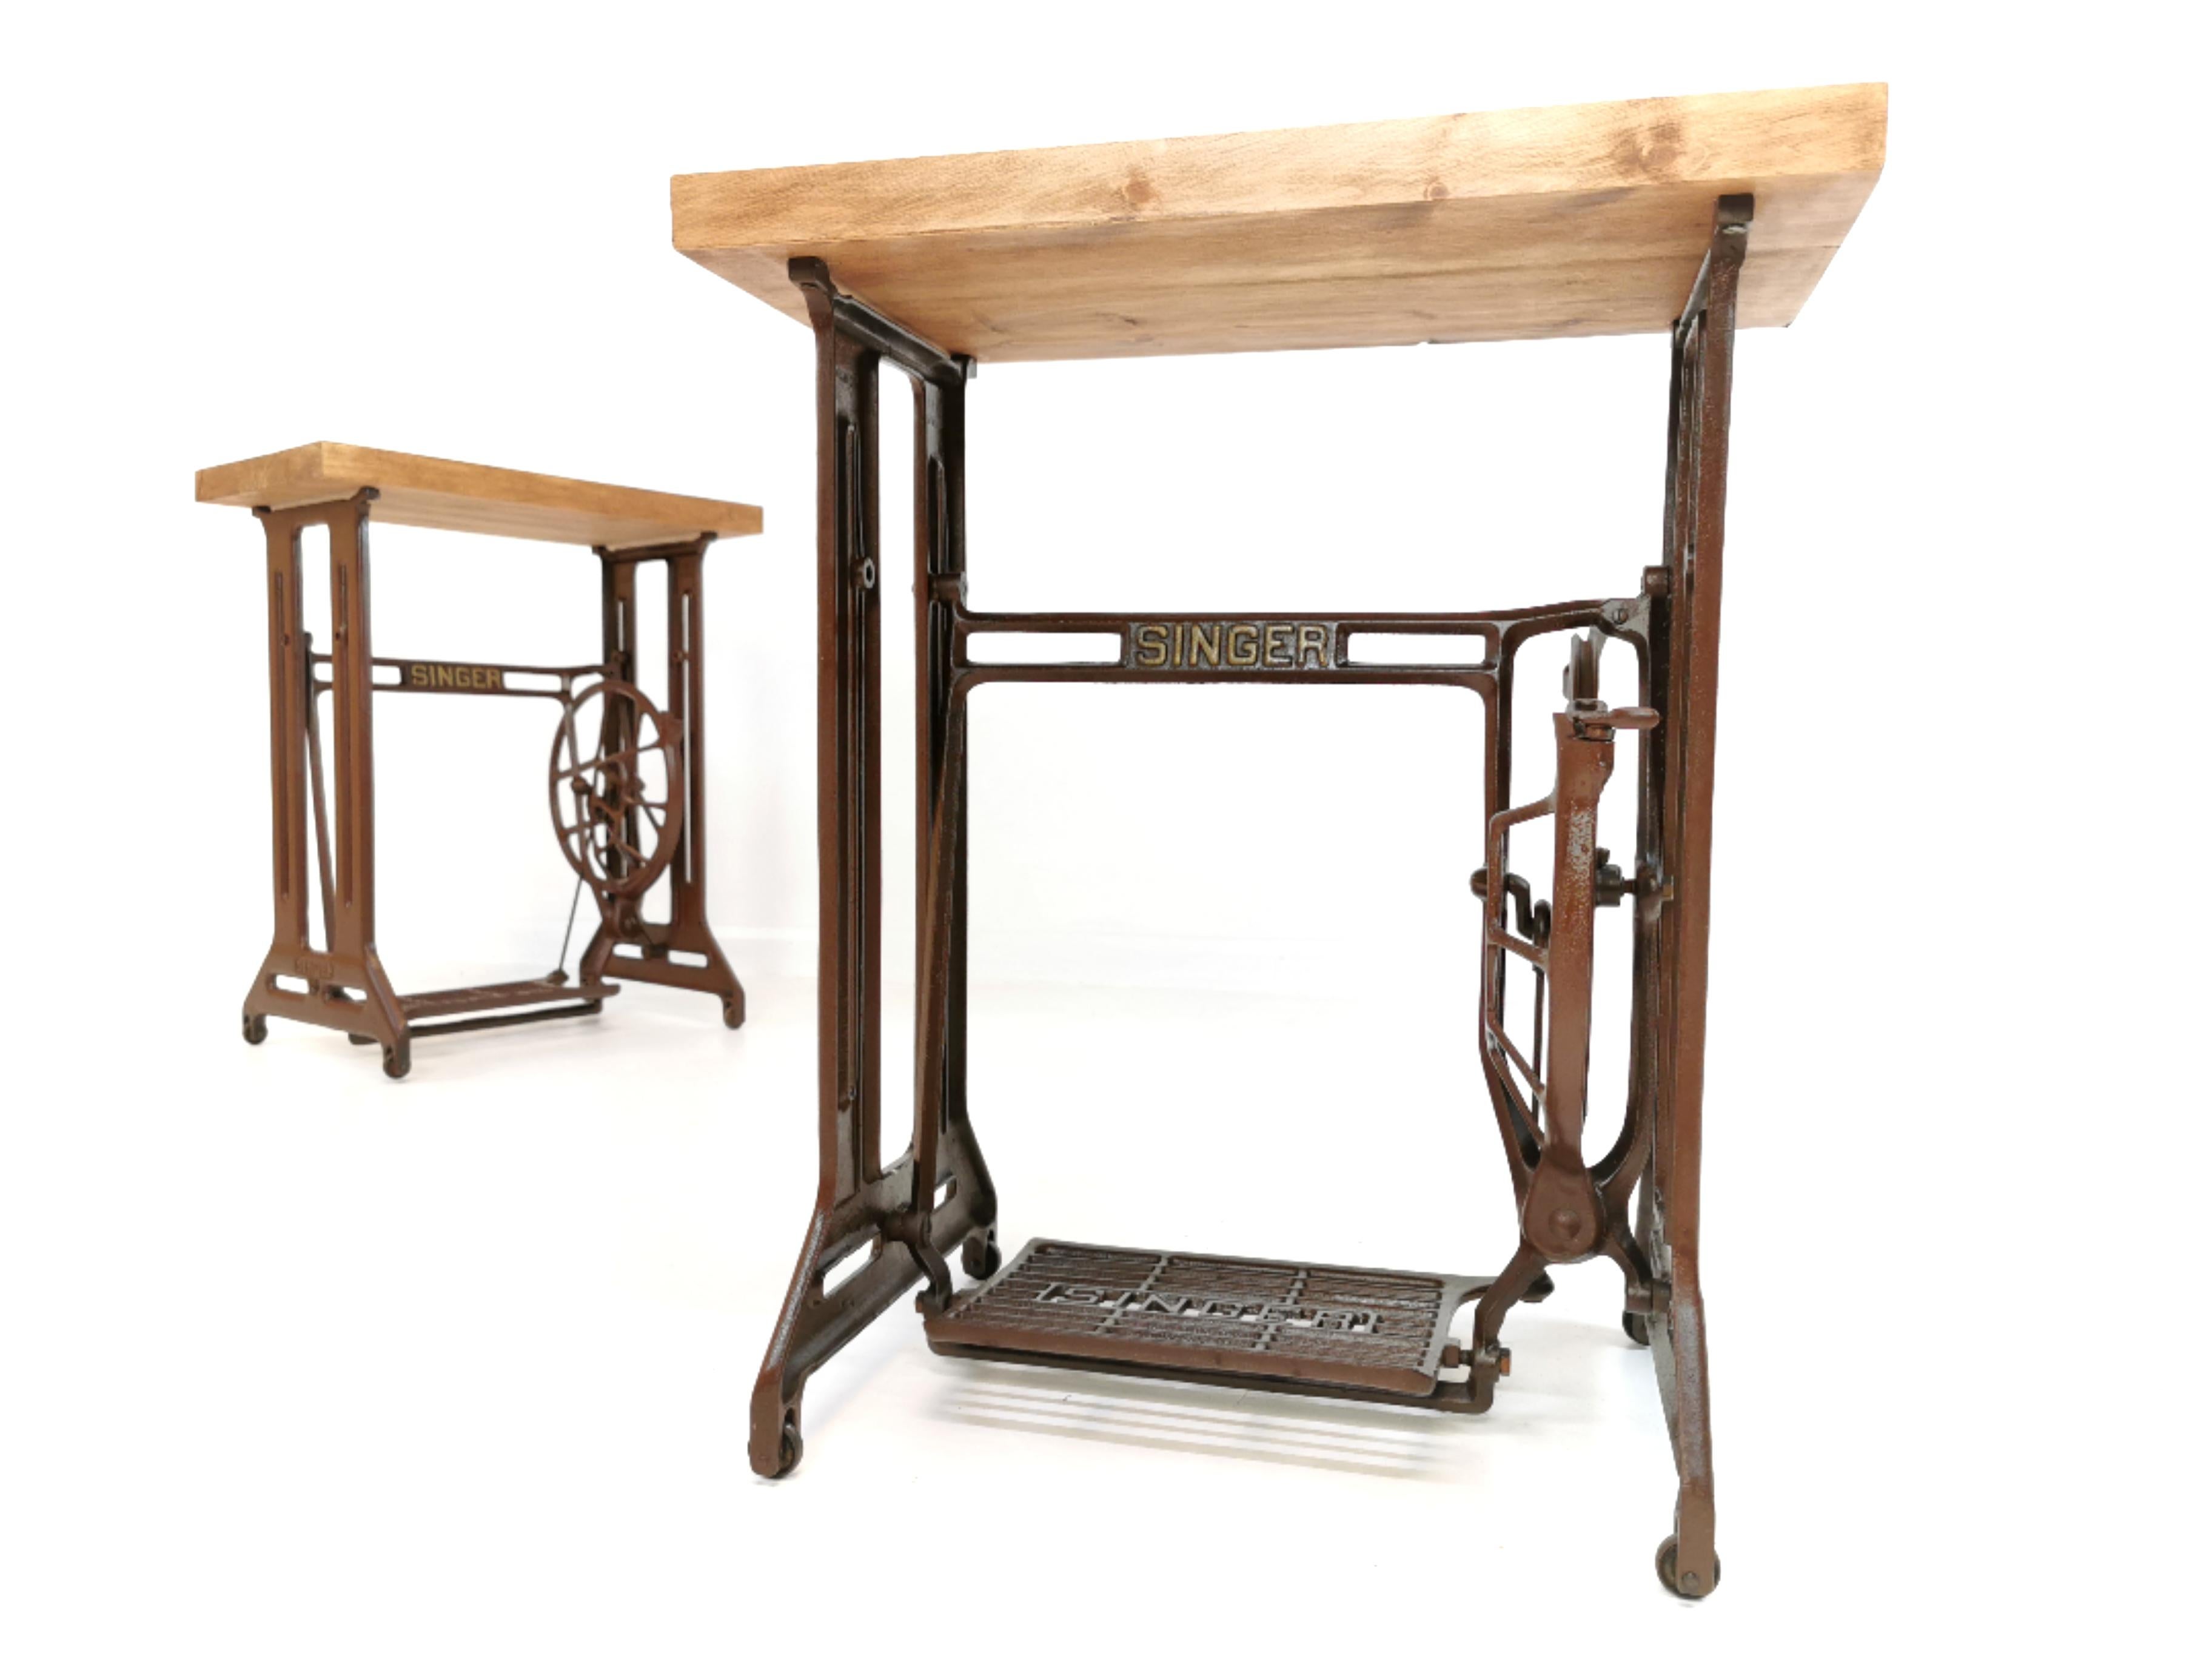 Two original singer sewing machine treadle stands fitted with a reclaimed wooden top.

These stands were originally made in Singers Kilbowie factory, Clydebank Scotland. The brown stands are not found as often.

Superb industrial Art Deco lines.